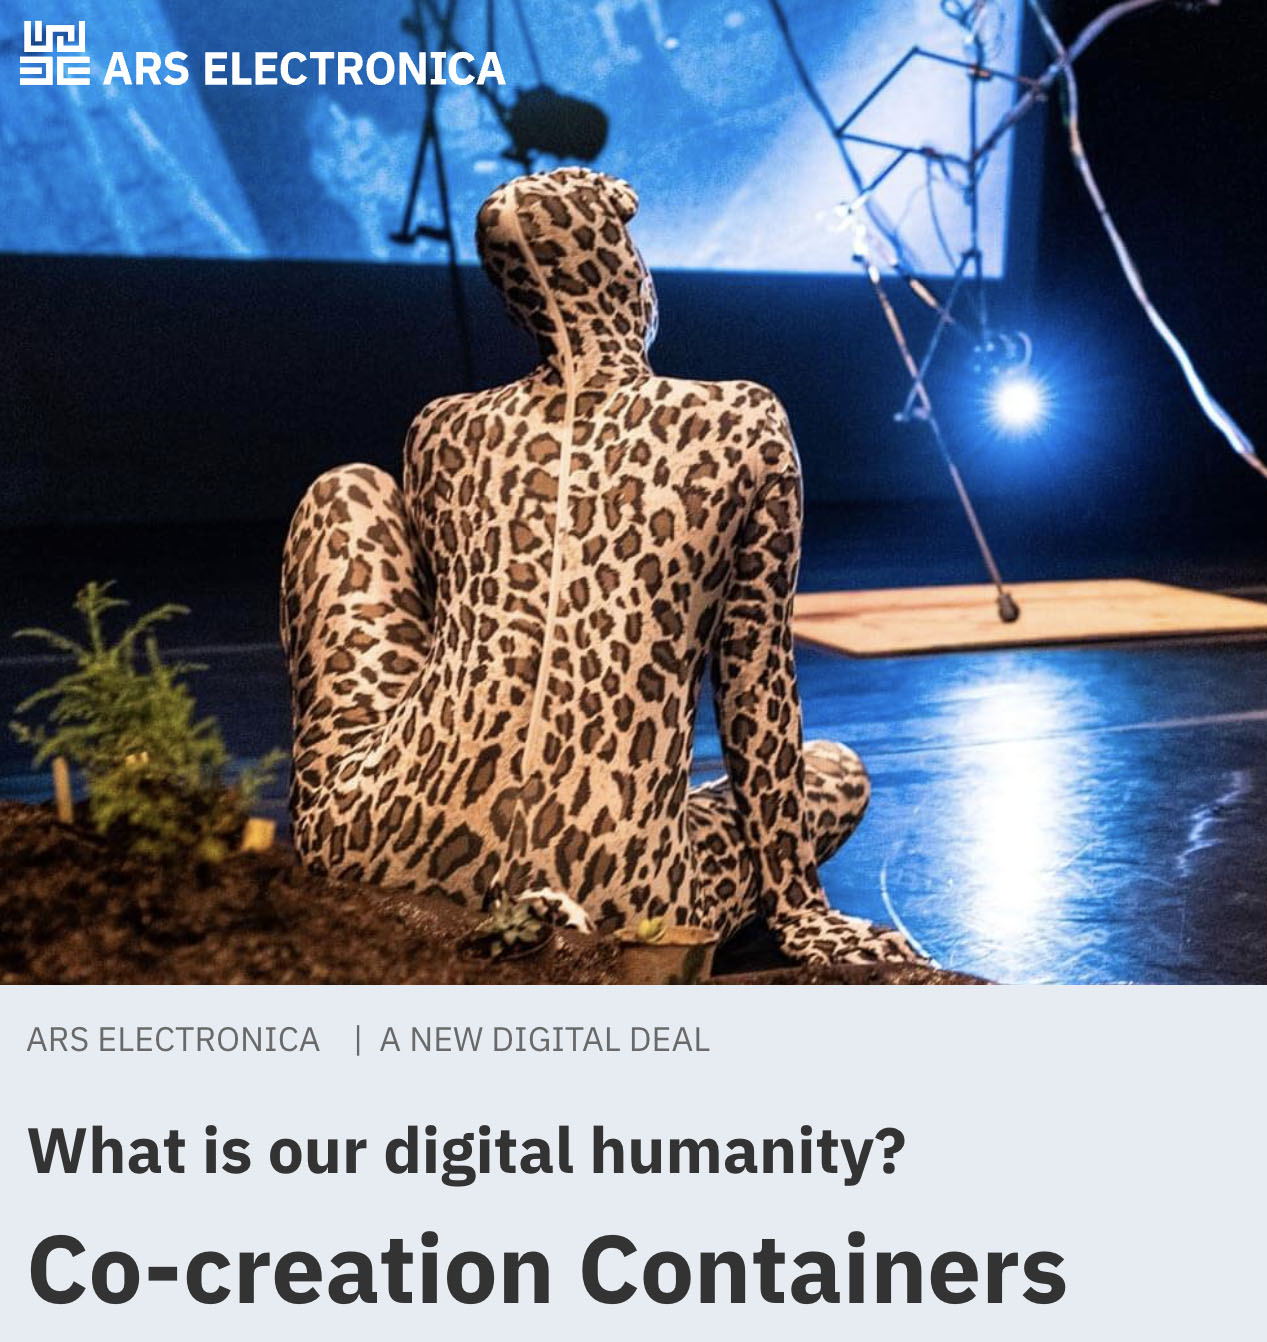 Co-creation Containers image featuring a woman in a leapord-print cat costume on a theater stage